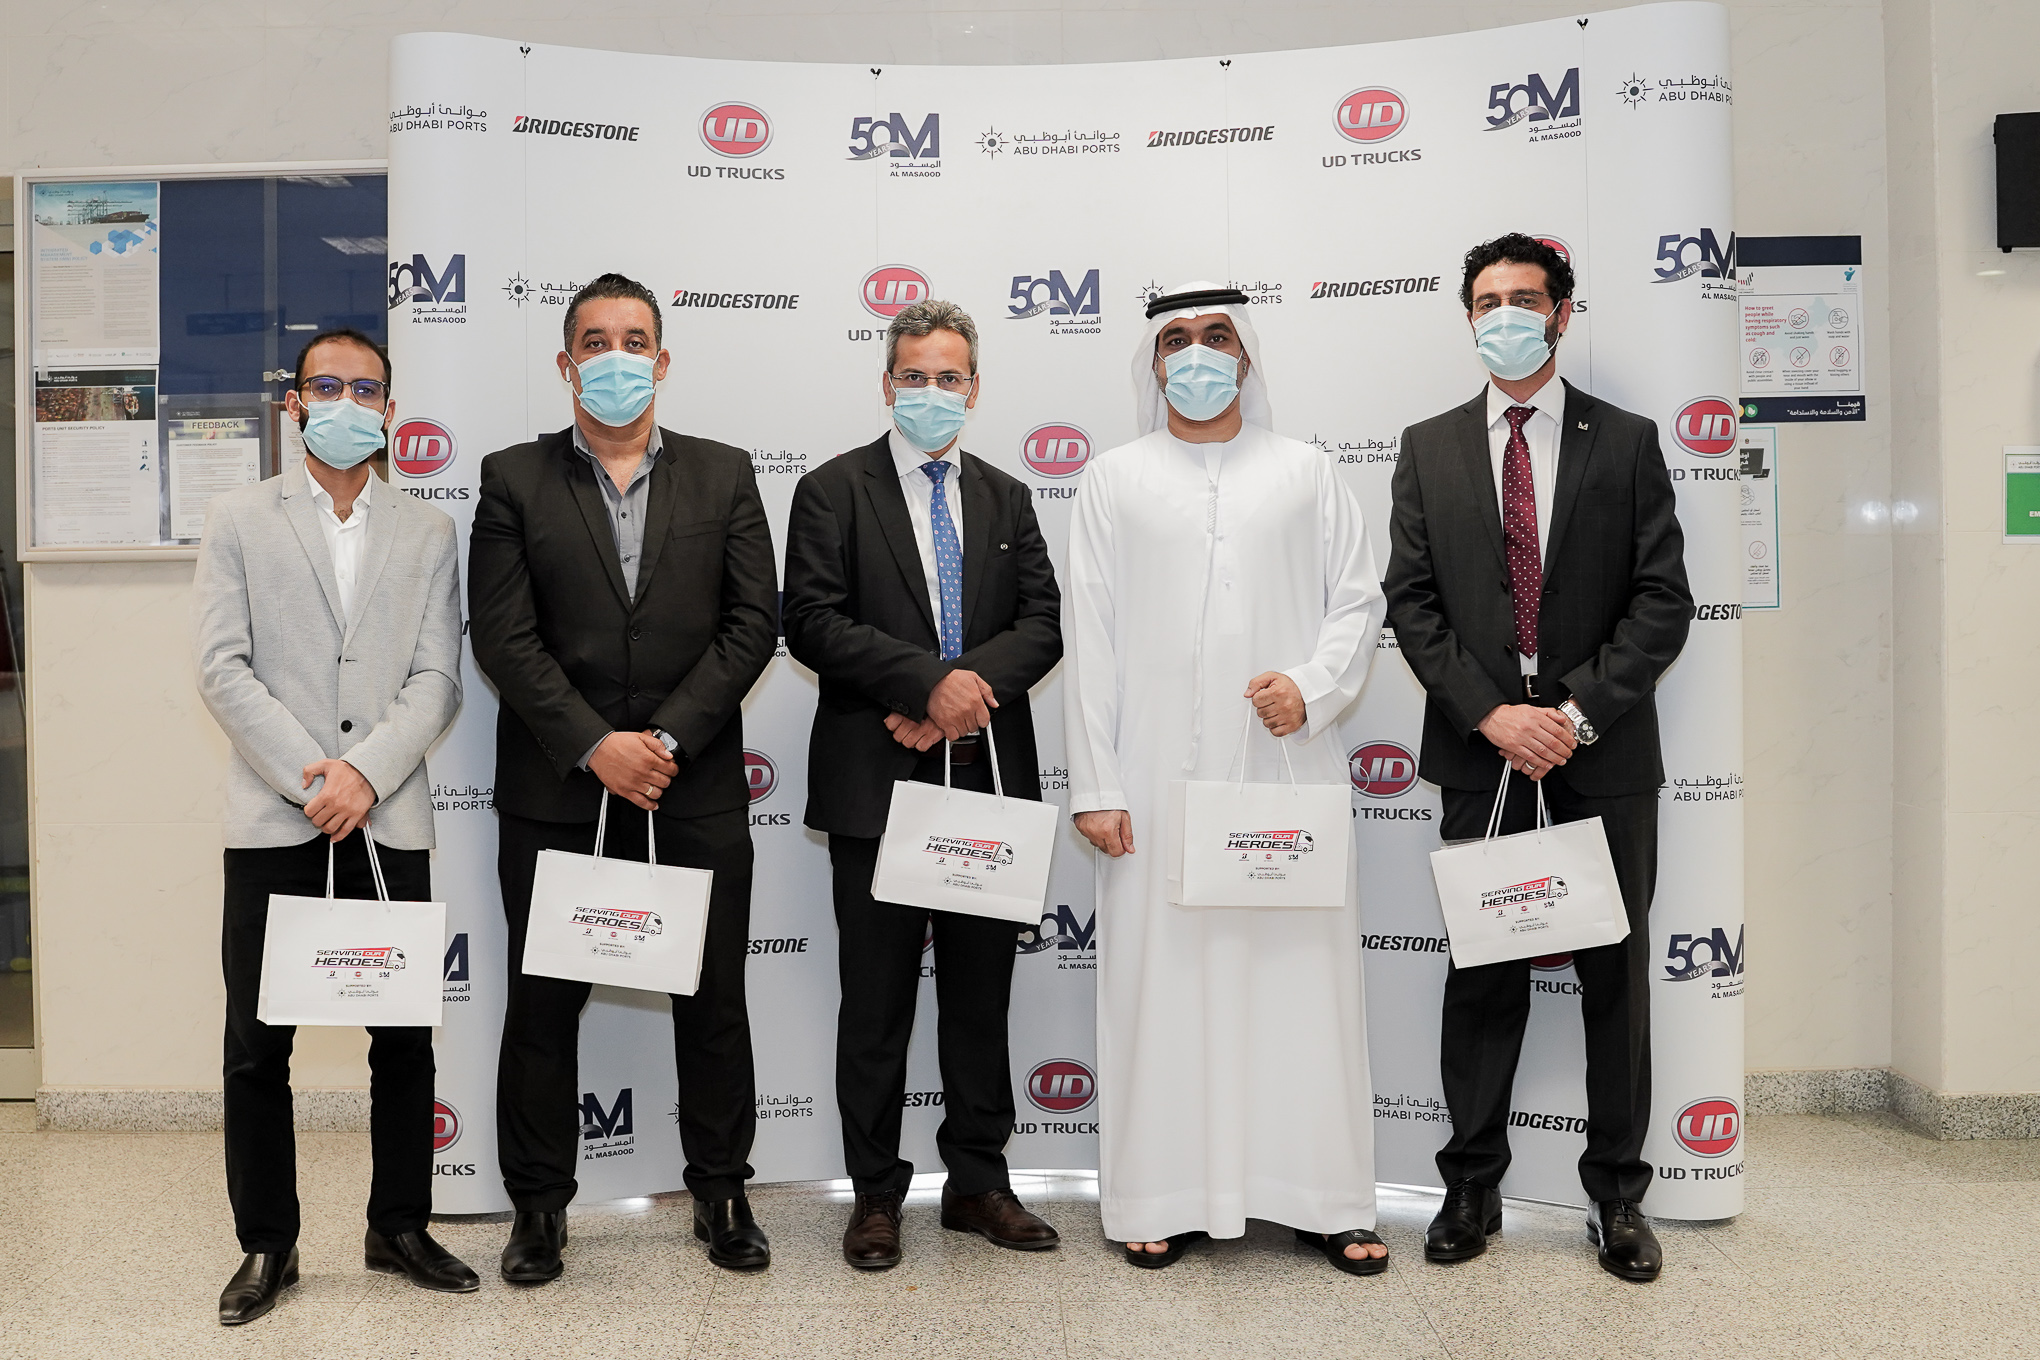 Al Masaood, UD Trucks, and Bridgestone Join Forces for "serving our heroes" campaign